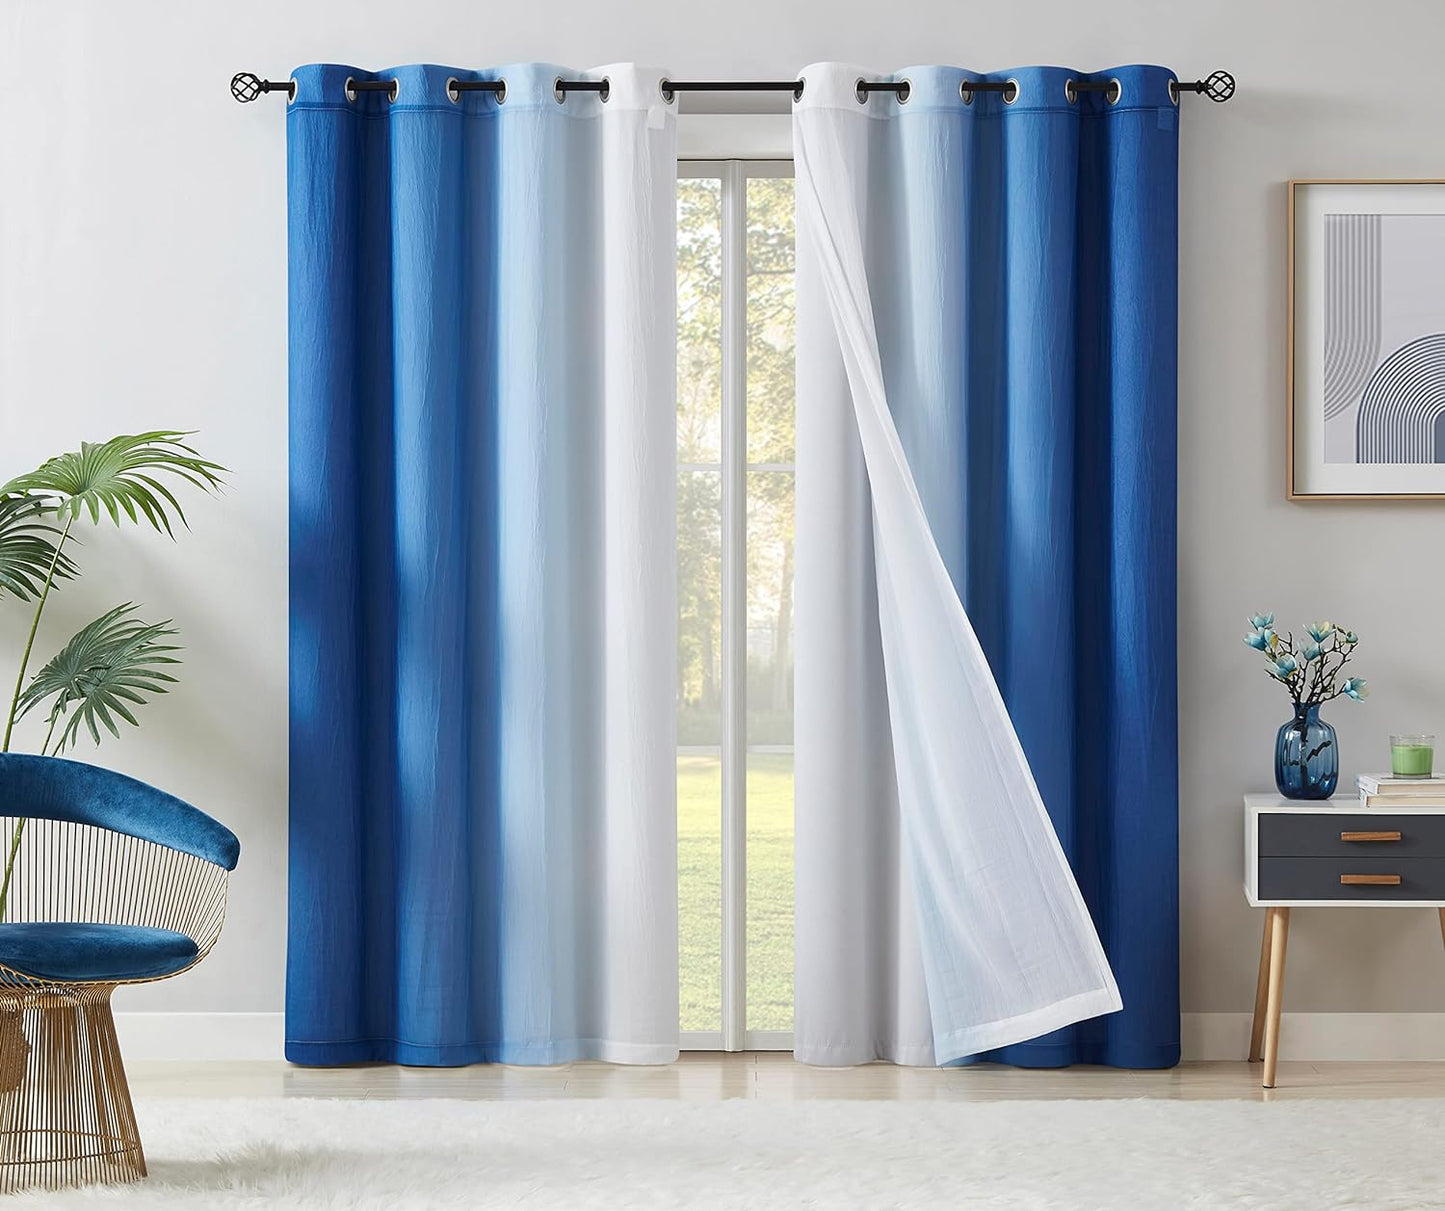 Mix and Match Blackout Curtains - Bedroom Solid Black Full Blackout Window Panels & Black Chiffon Sheer Curtains Thermal Insulated Drapes for Living Room, Grommet, 52" W X 63" L, Set of 4  Purainbow Blue/White 52" X 63" 